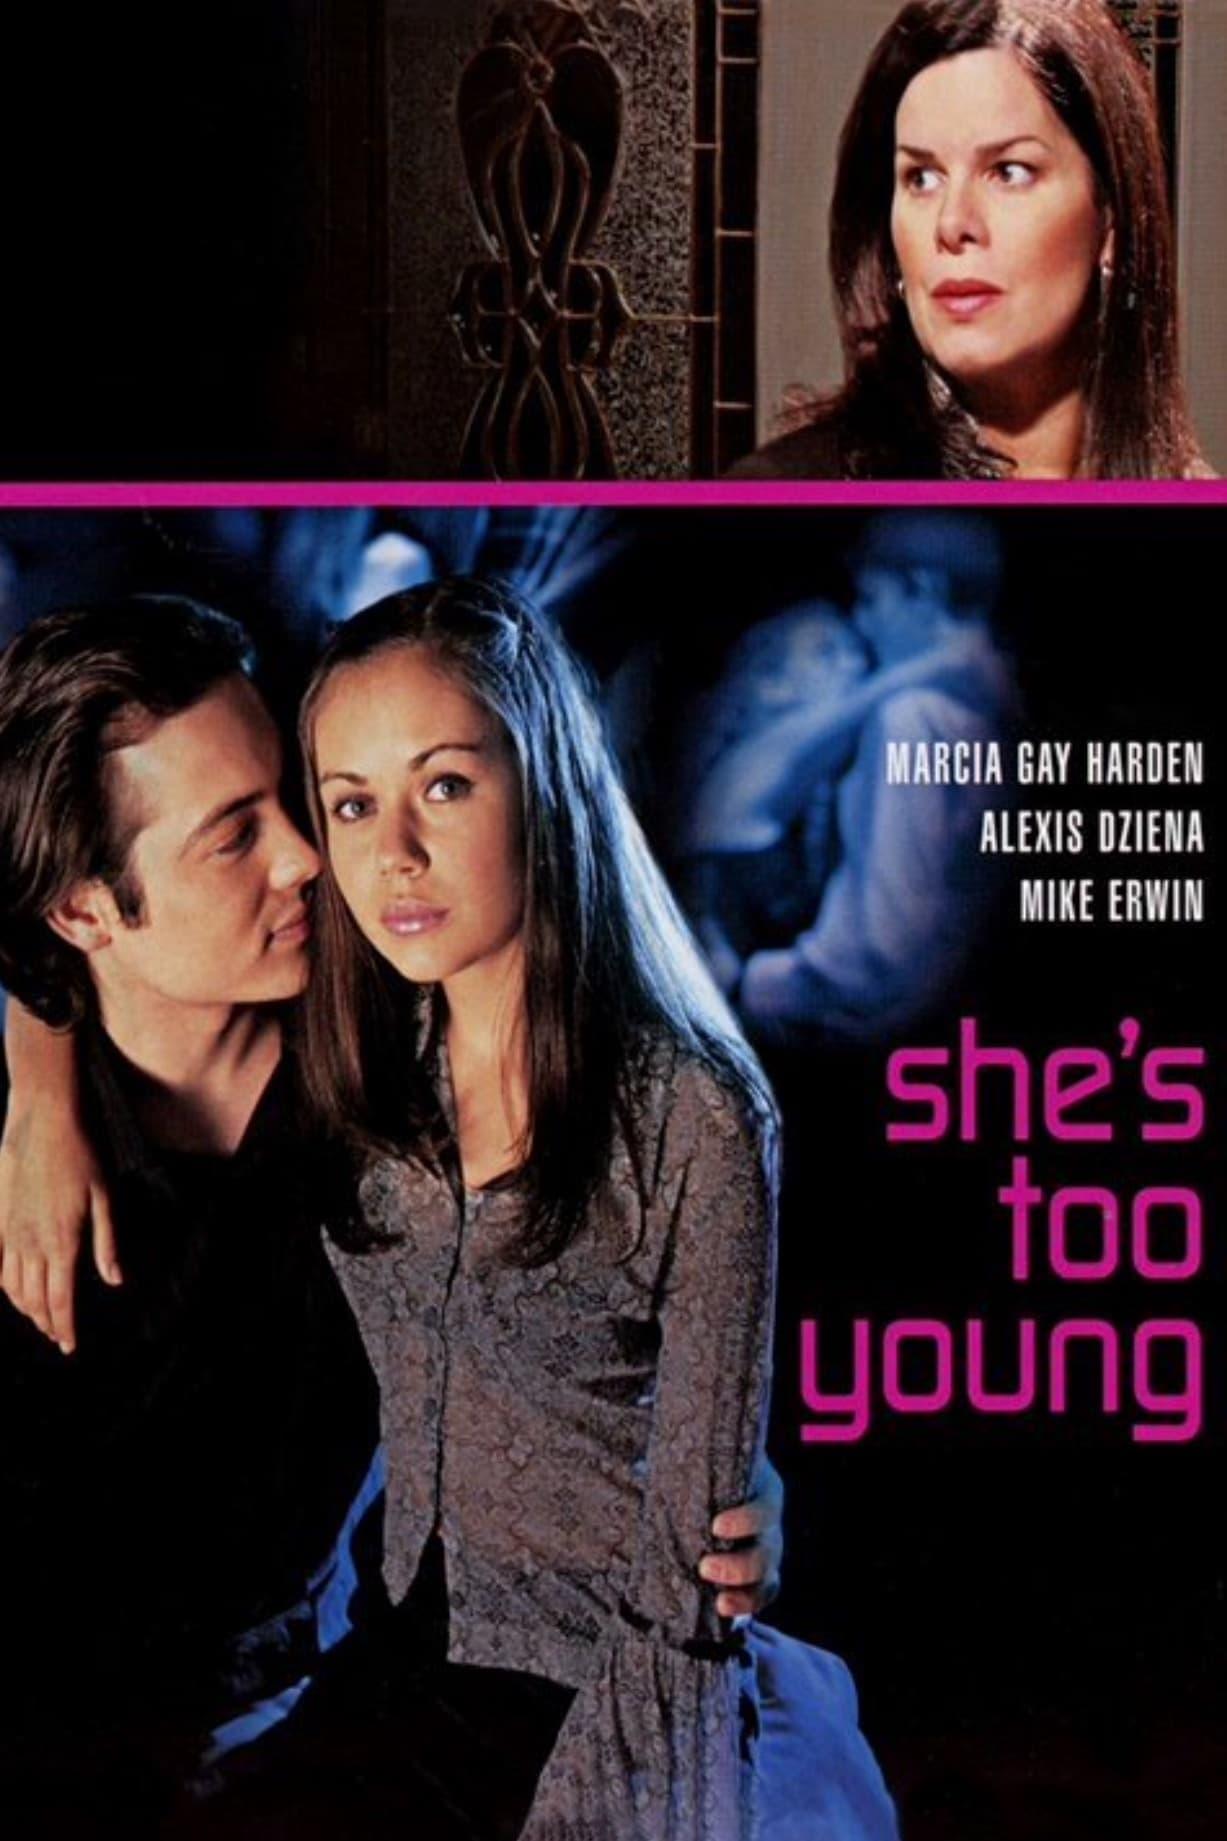 She's Too Young poster